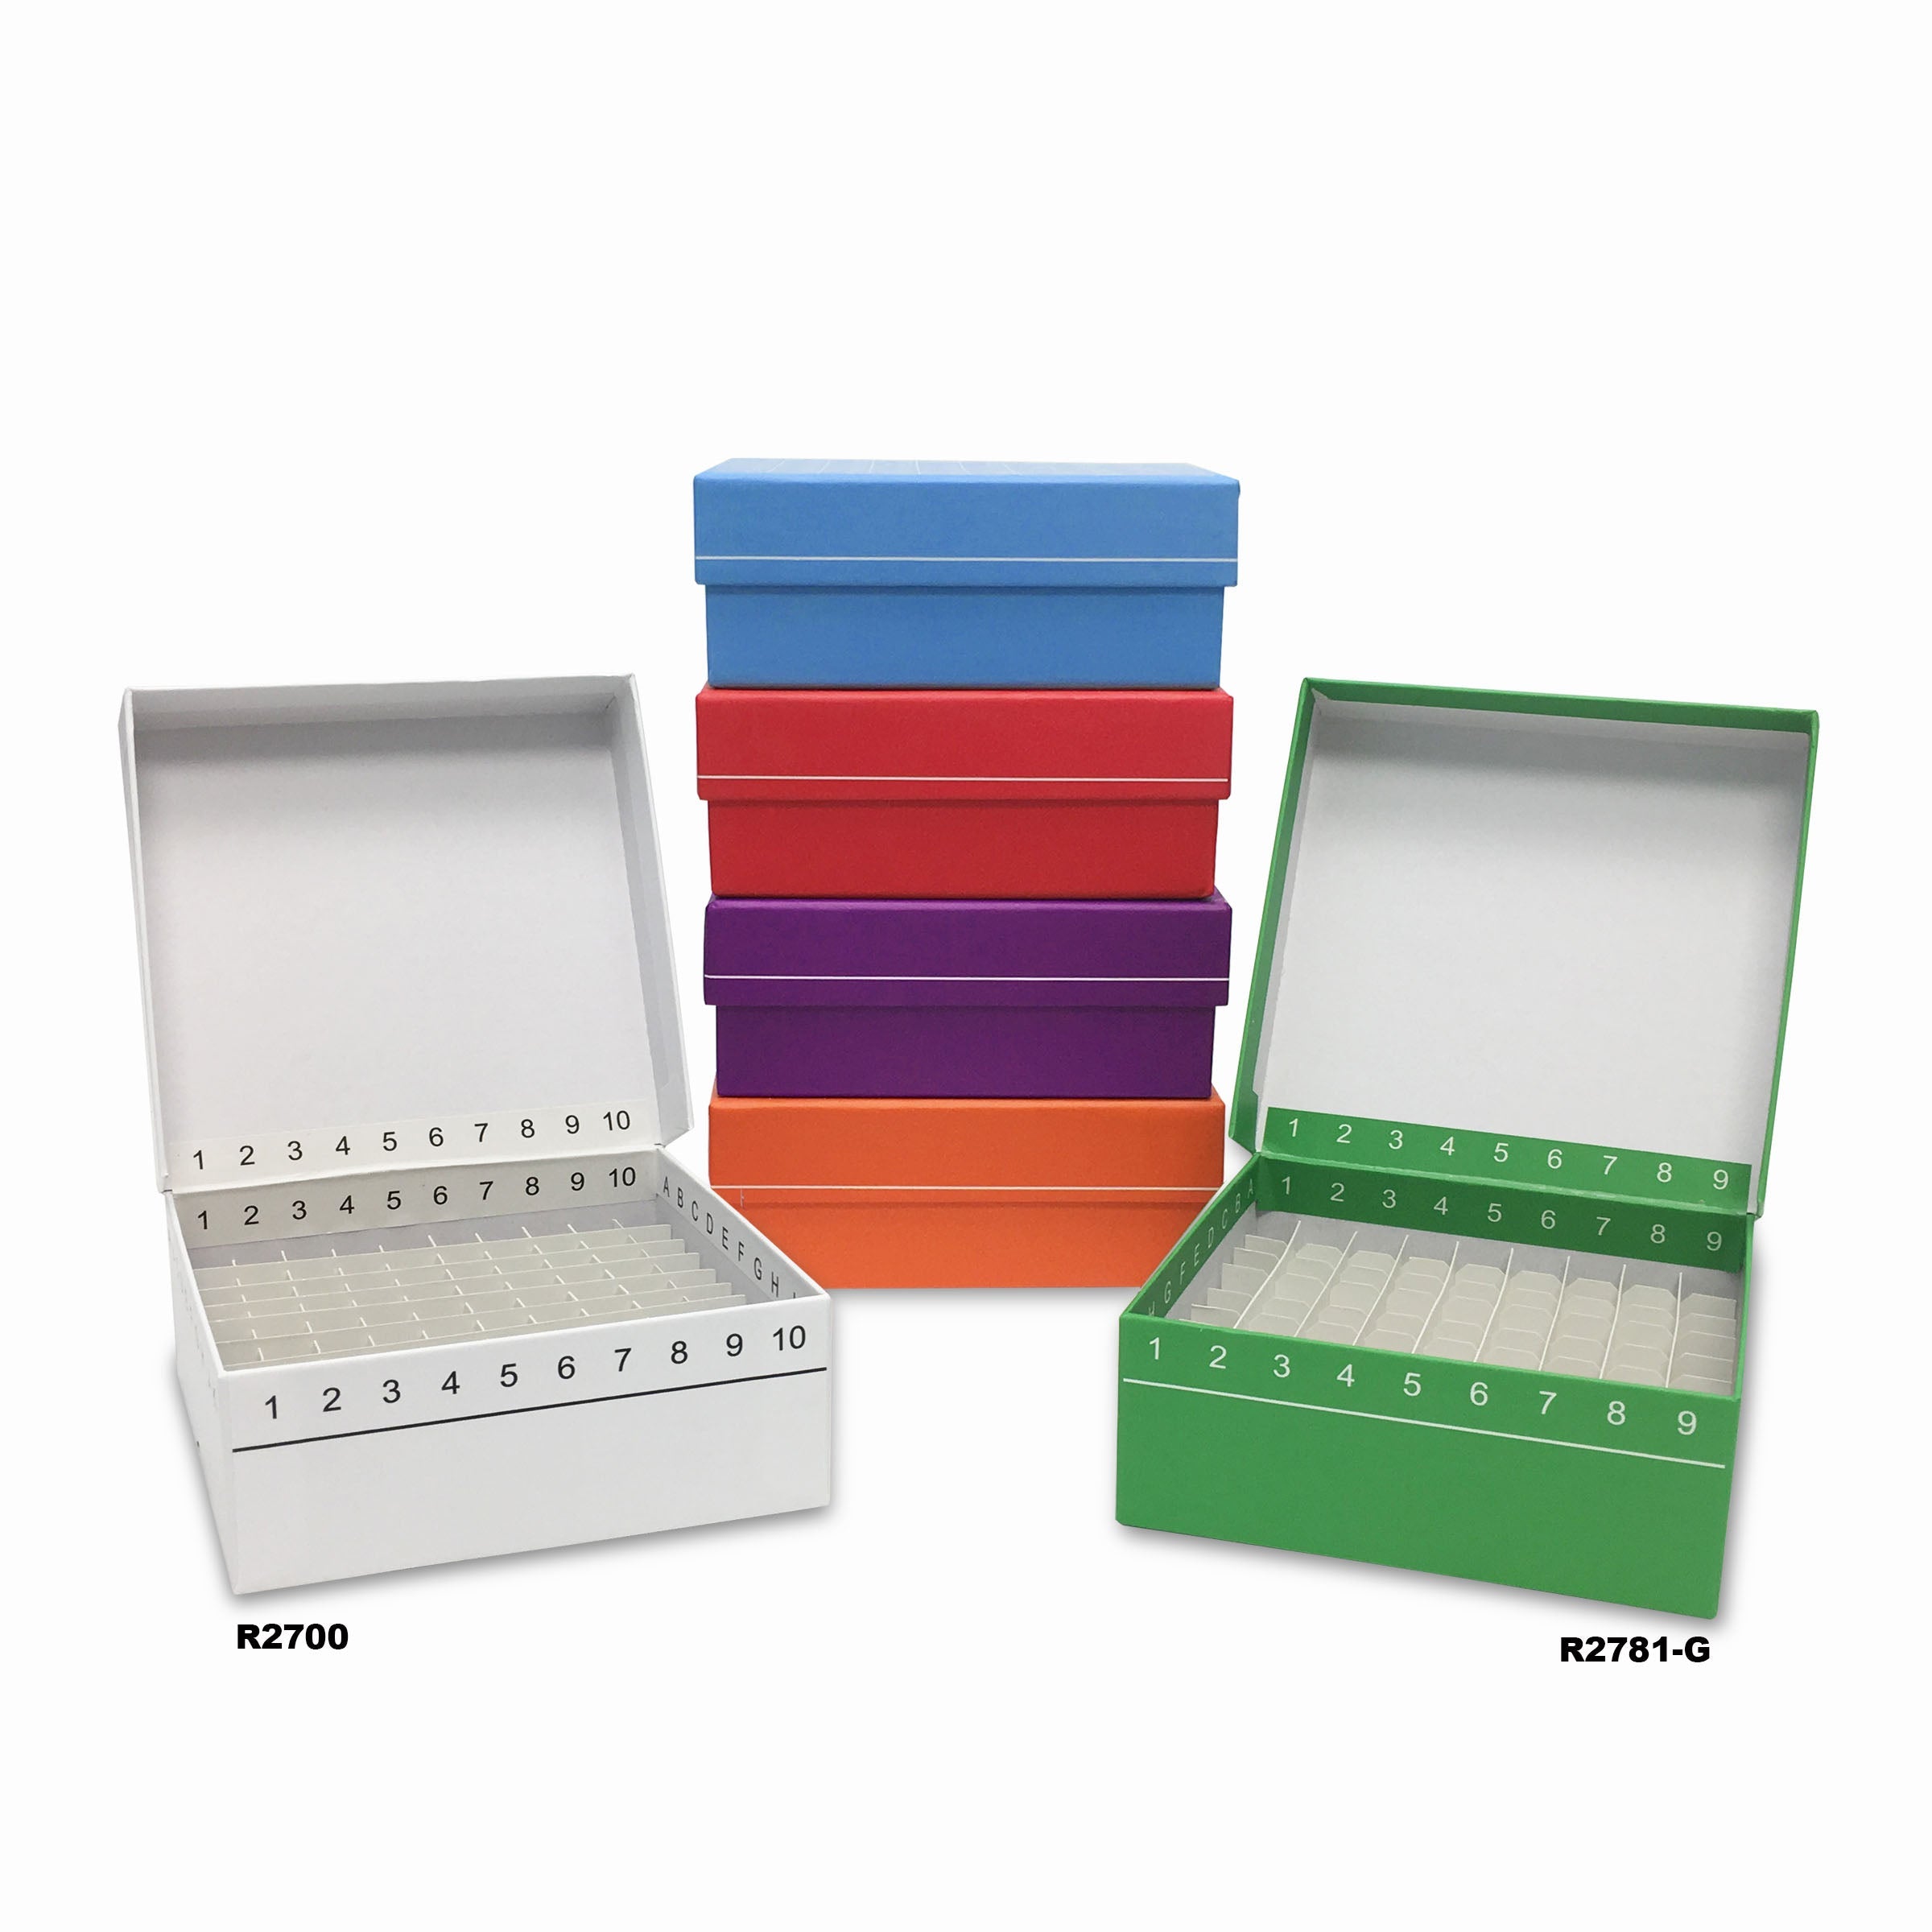 MTC Bio R2700-R, Fliptop Carboard Freezer Box with Attached Hinged Lid, 100-Place, Red, 5/pk